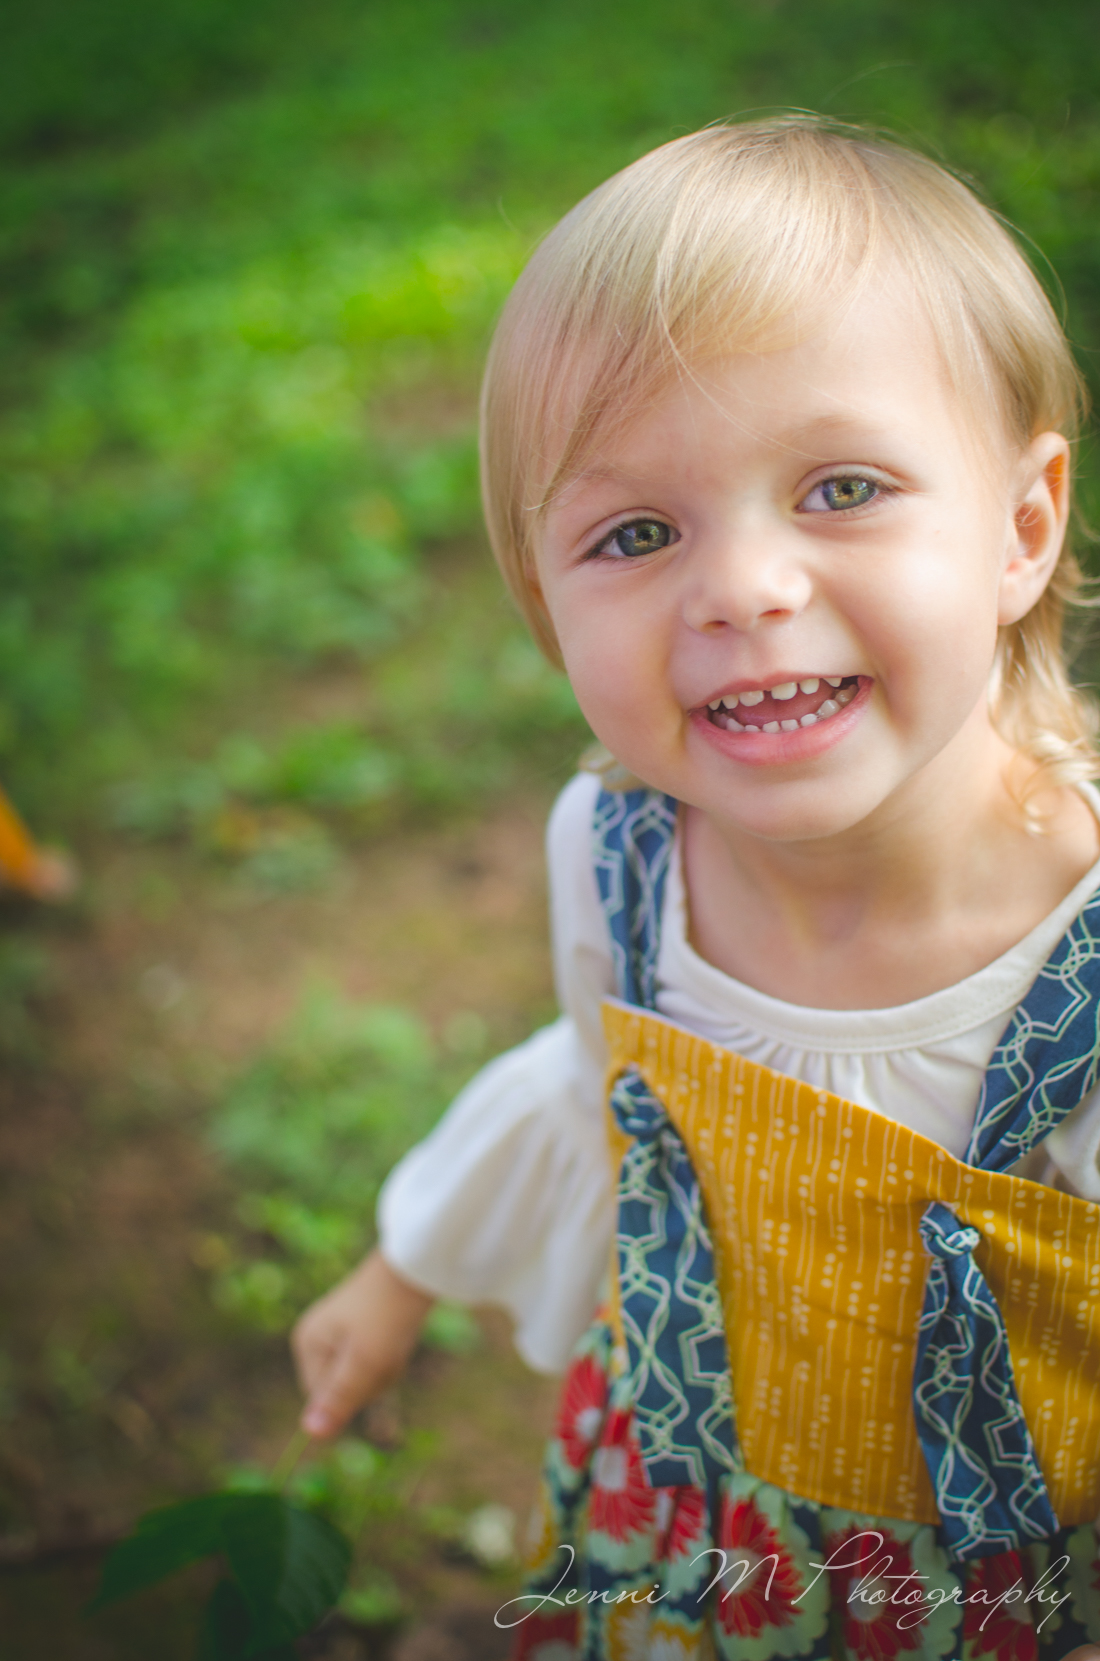 Jenni M Photography 2 year old birthday photography outdoor affordable natural-7